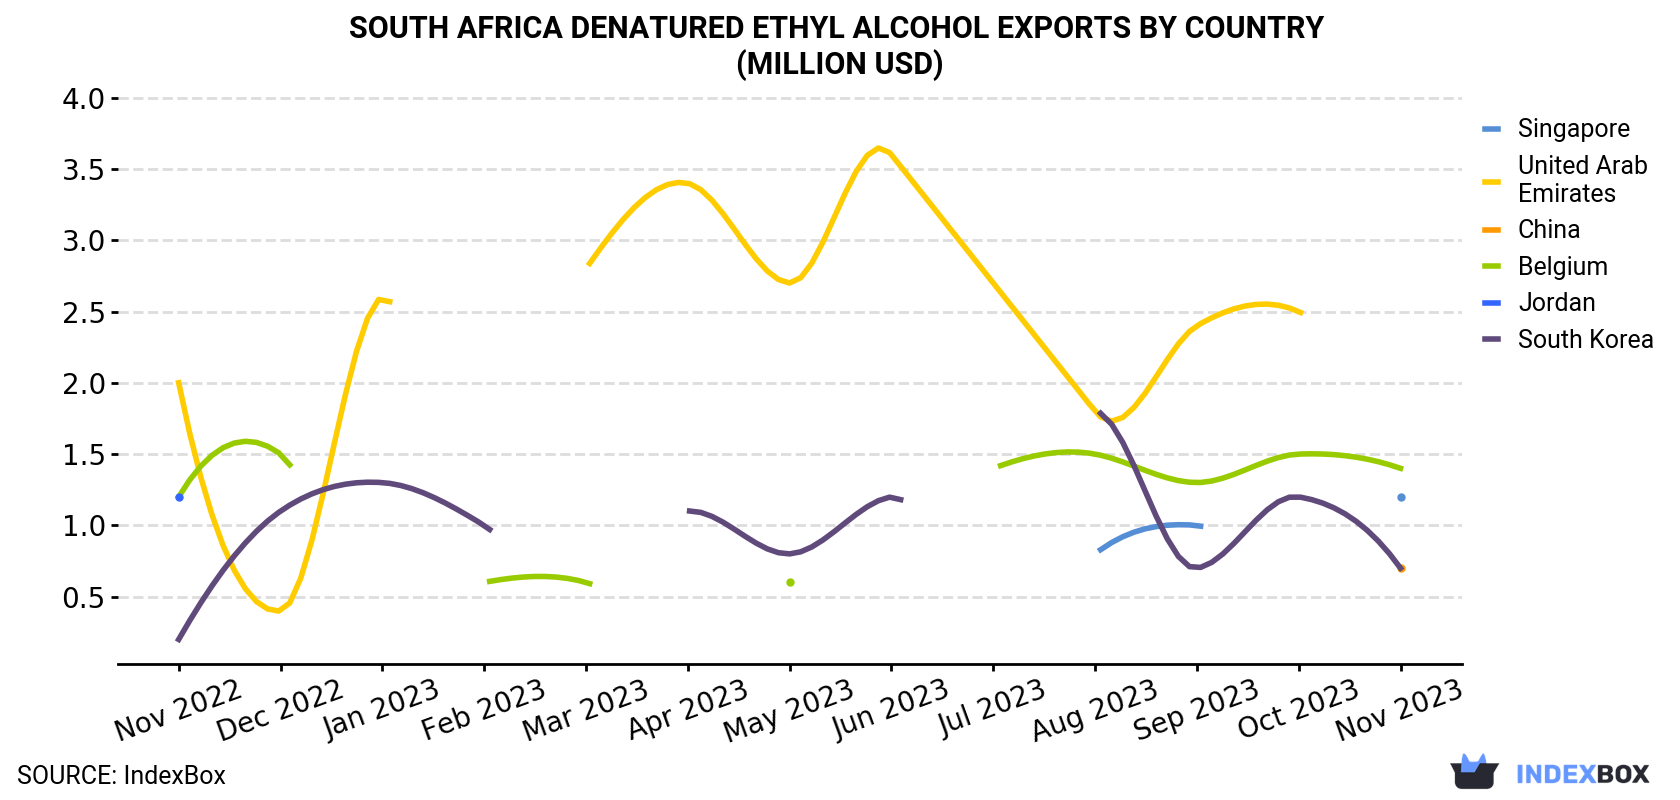 South Africa Denatured Ethyl Alcohol Exports By Country (Million USD)